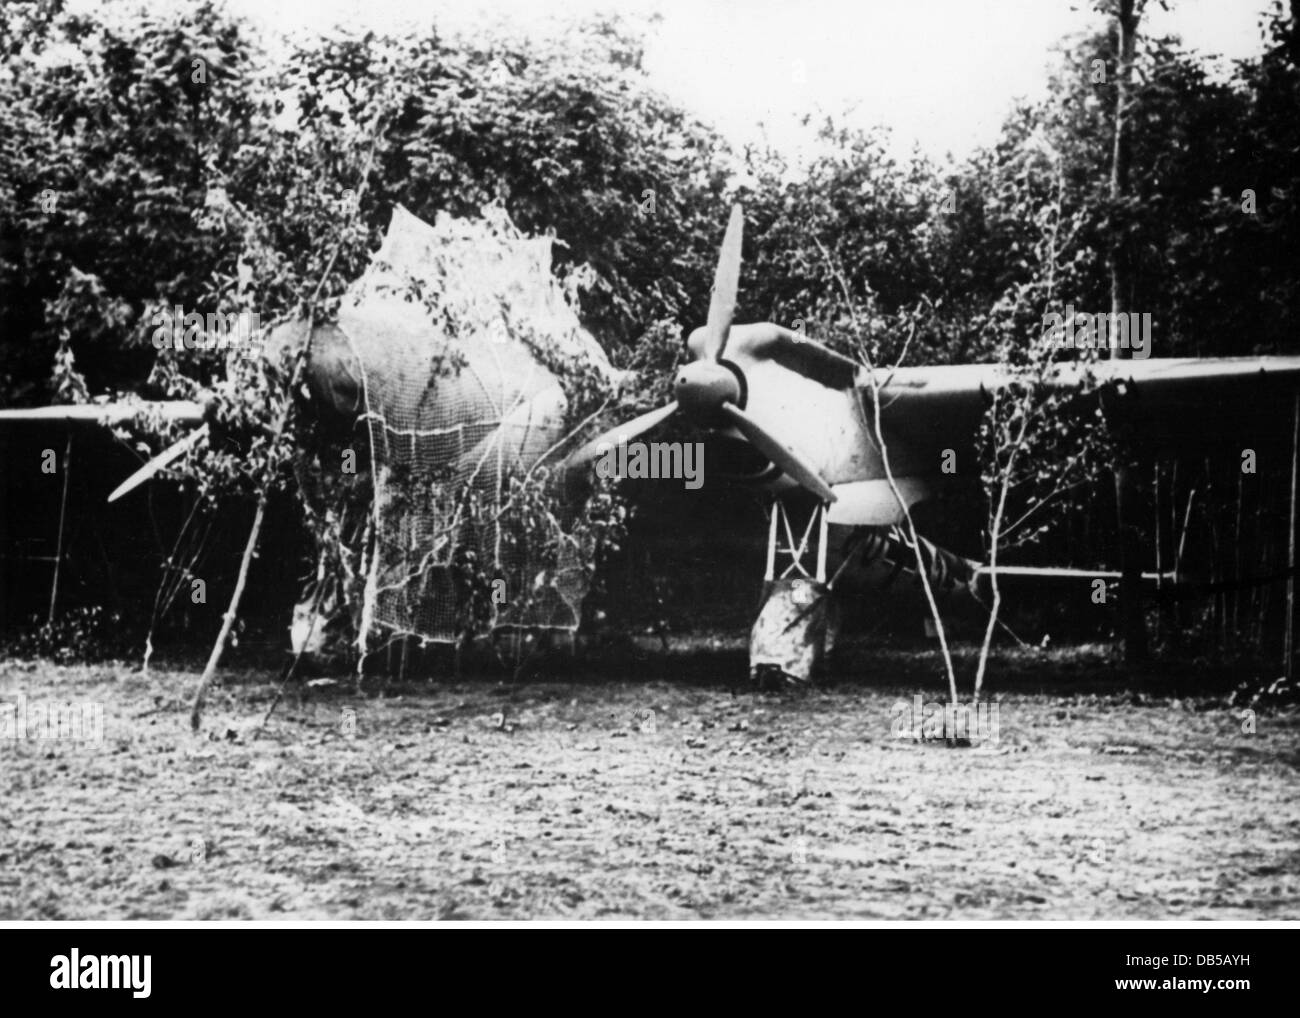 events, Second World War / WWII, aerial warfare, aircraft, camouflaged German bomber Dornier Do 17, Wienerwald, Austria, 1939, Do-17, Do17, bombers, 20th century, historic, historical, Luftwaffe, Wehrmacht, Germany, Third Reich, plane, planes, Vienna Woods, camouflage, 1930s, Additional-Rights-Clearences-Not Available Stock Photo